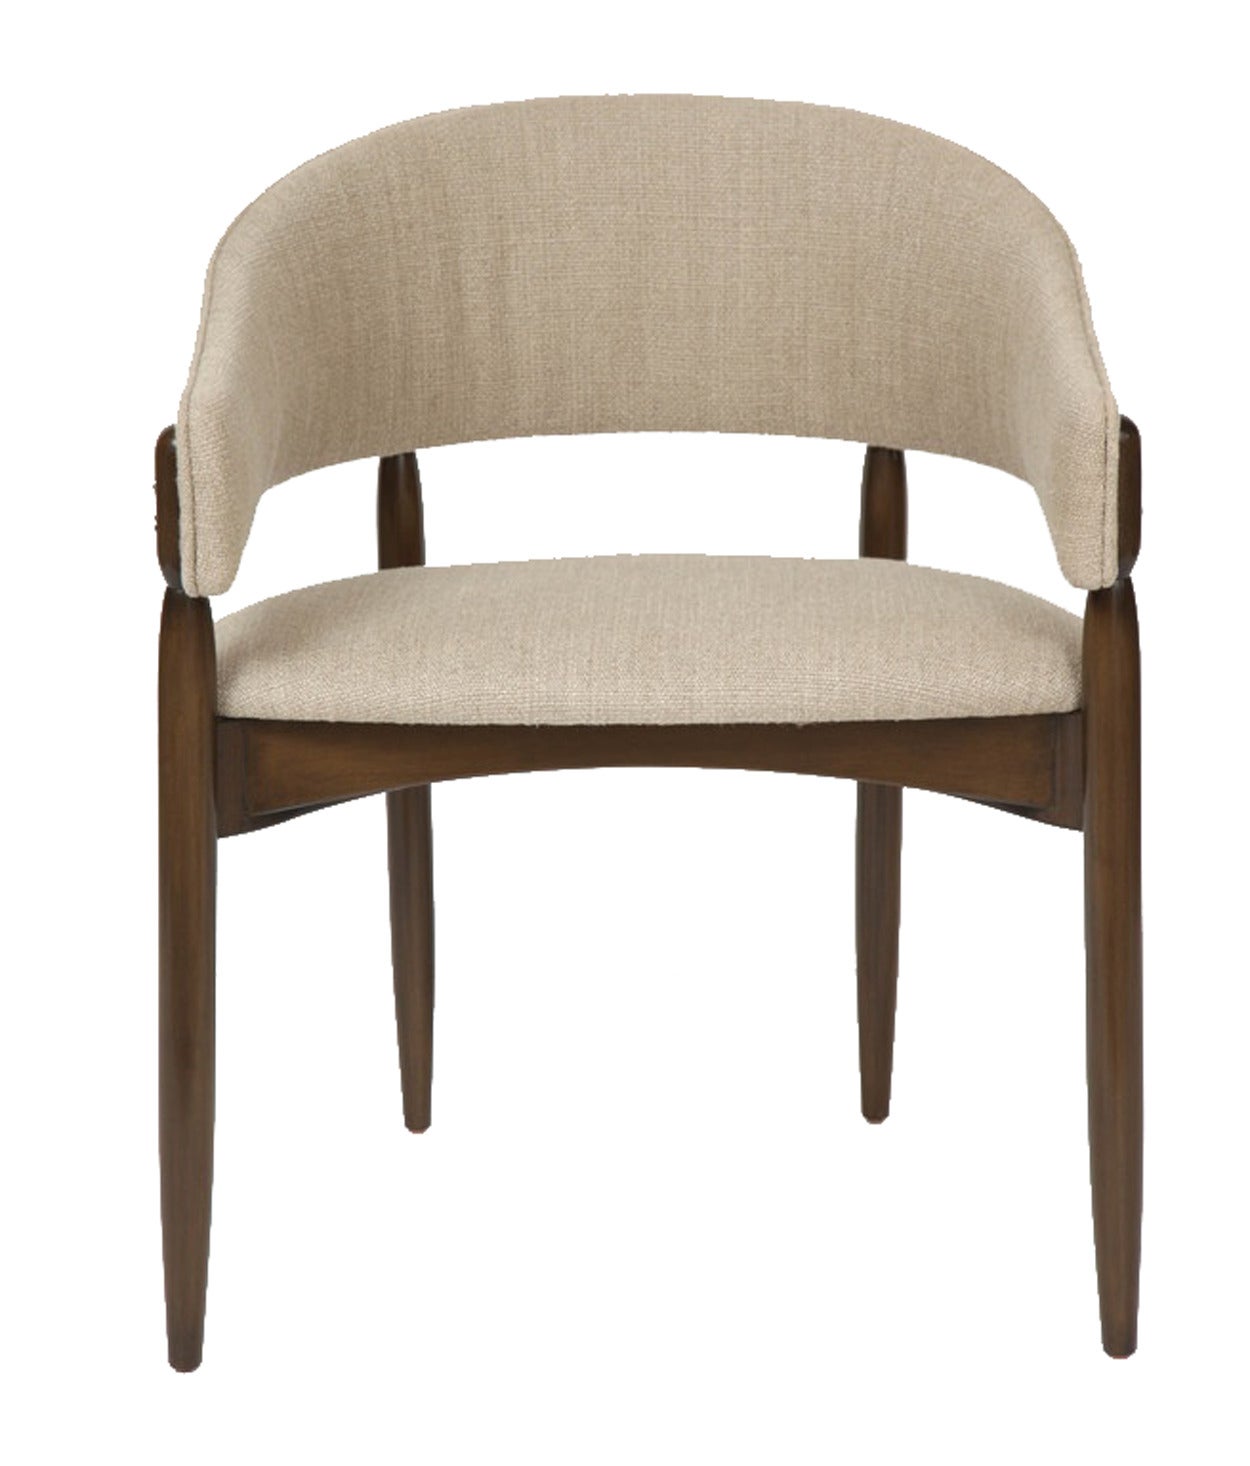 Enroth dining chair.
Seat height-18”. 
Seat depth -18.5”. 
COM requirements: 2yards. 
5% up-charge for contrasting fabrics and or welting. 
COL requirements: 40 sq. feet. 
5% percentage up-charge for all COL or exotic materials. 

Custom